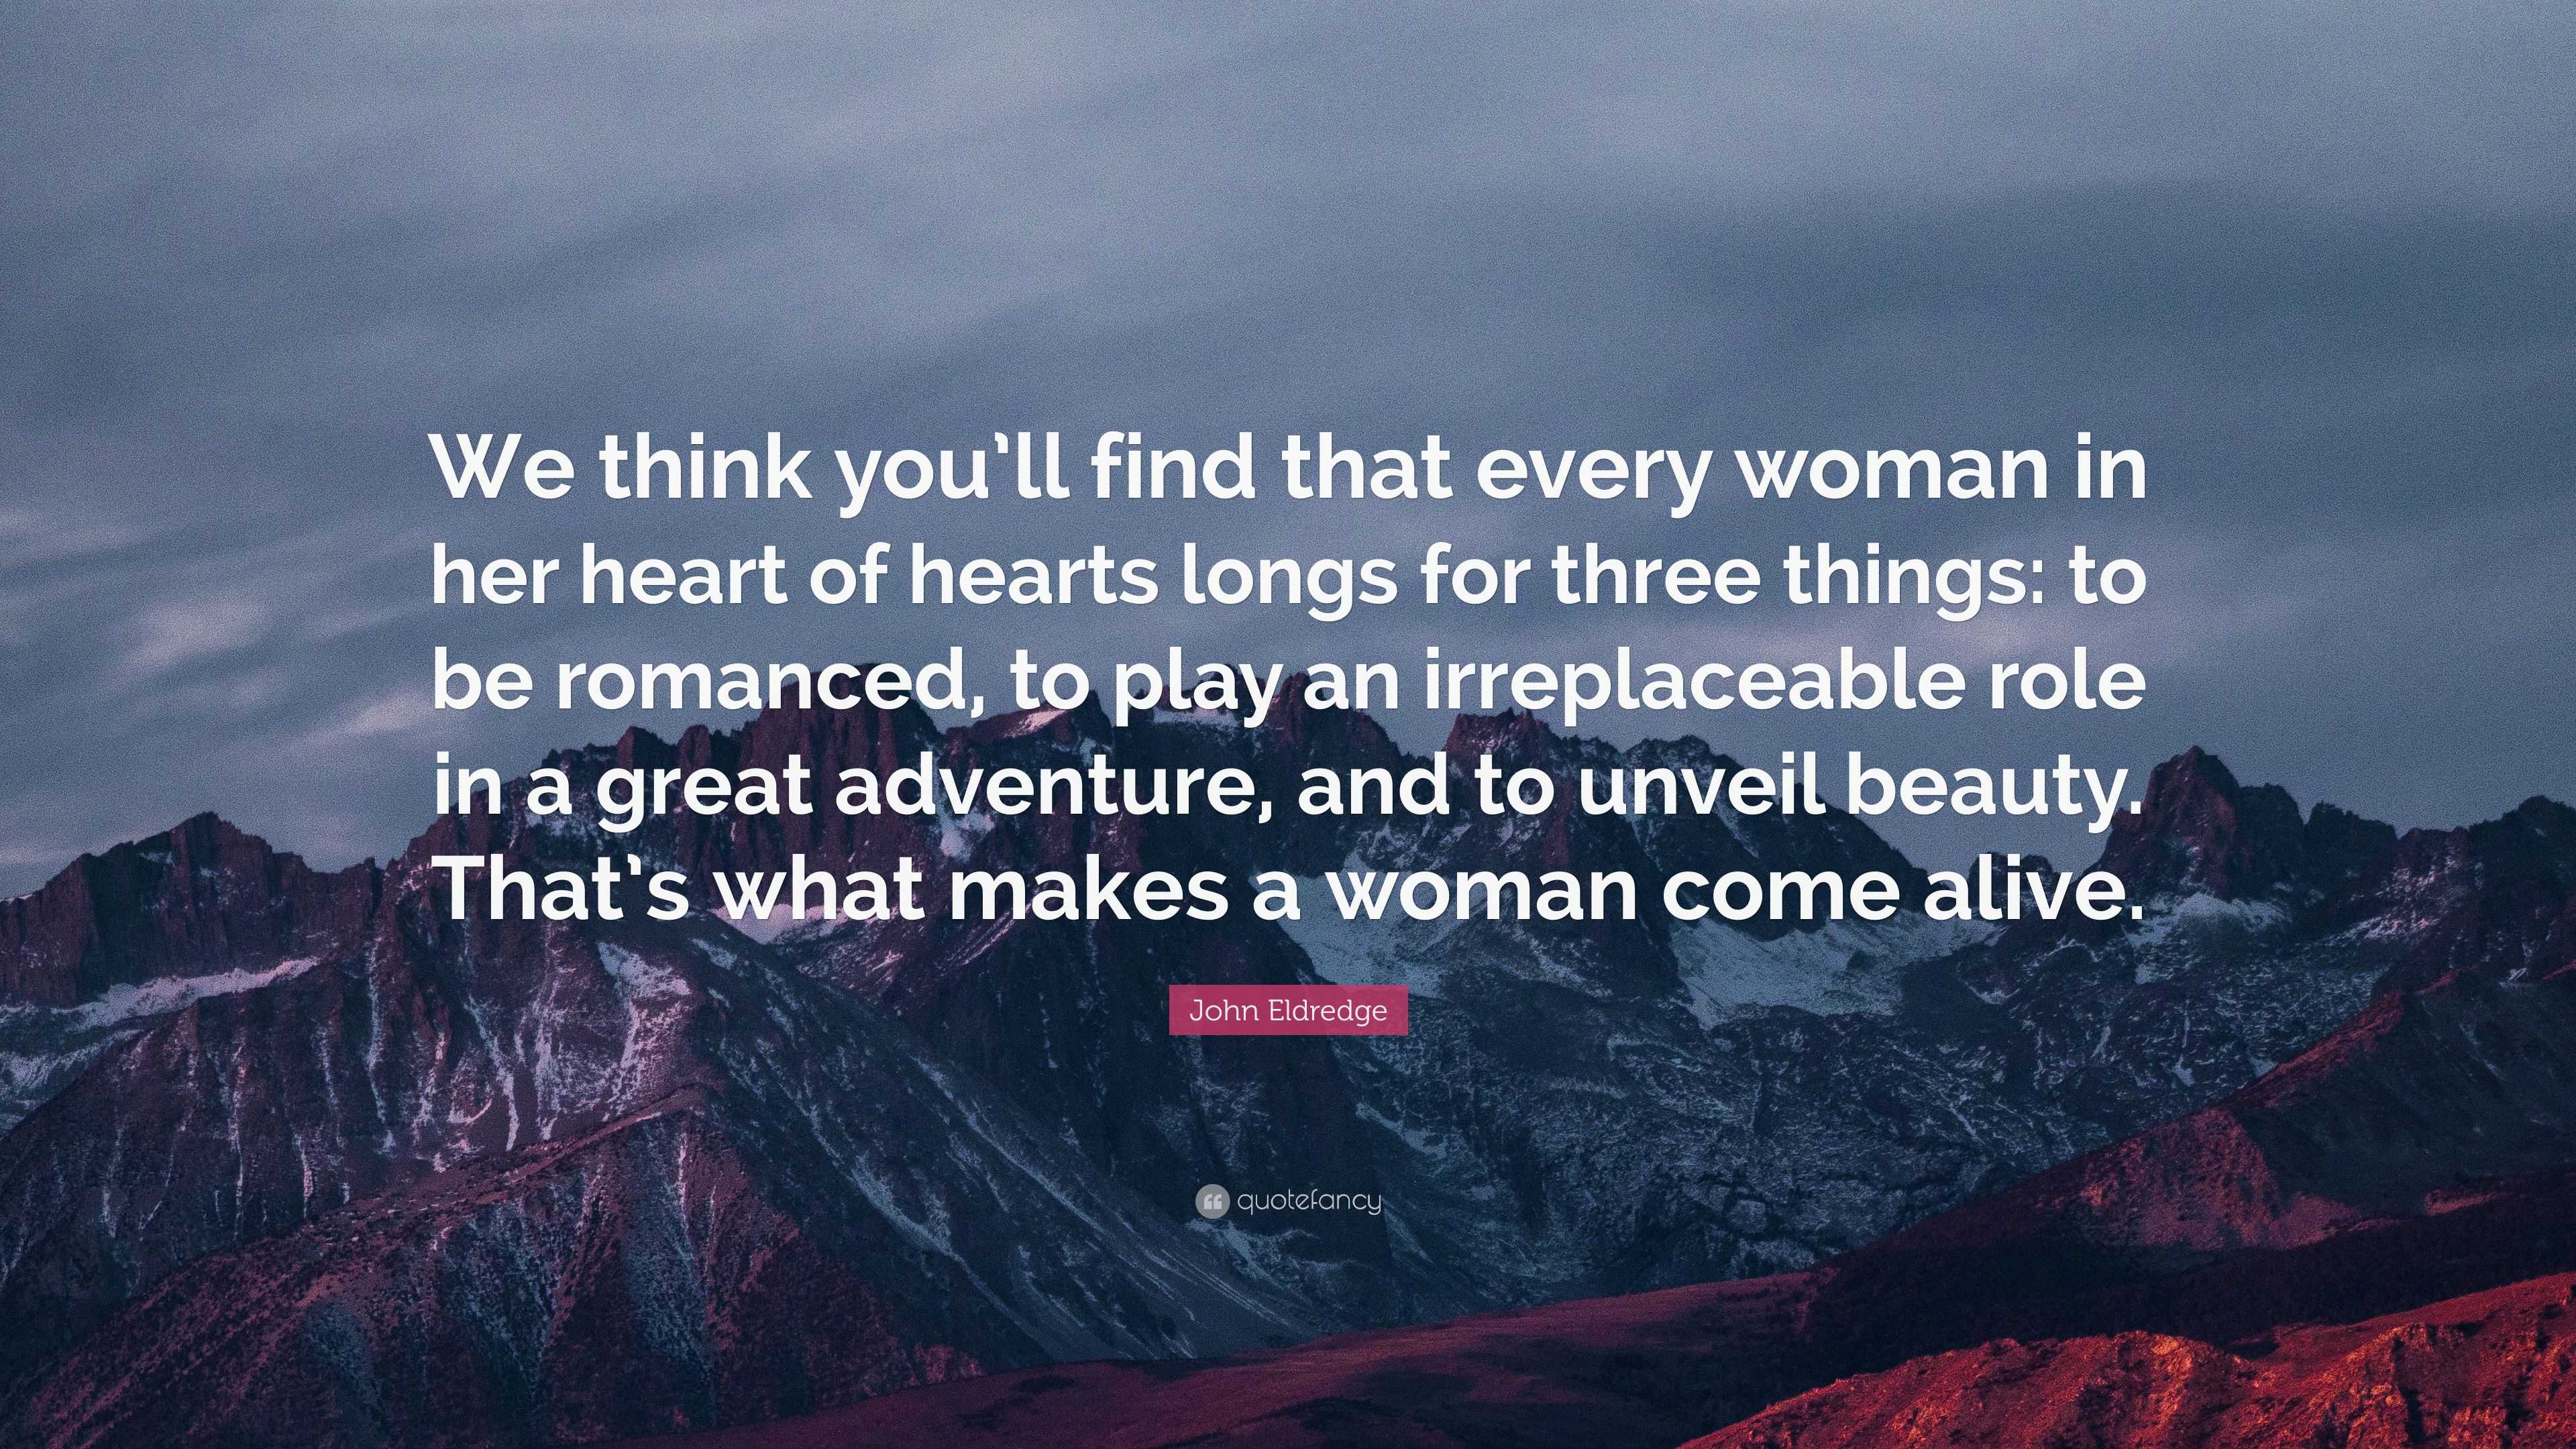 John Eldredge Quote: “We think you’ll find that every woman in her ...